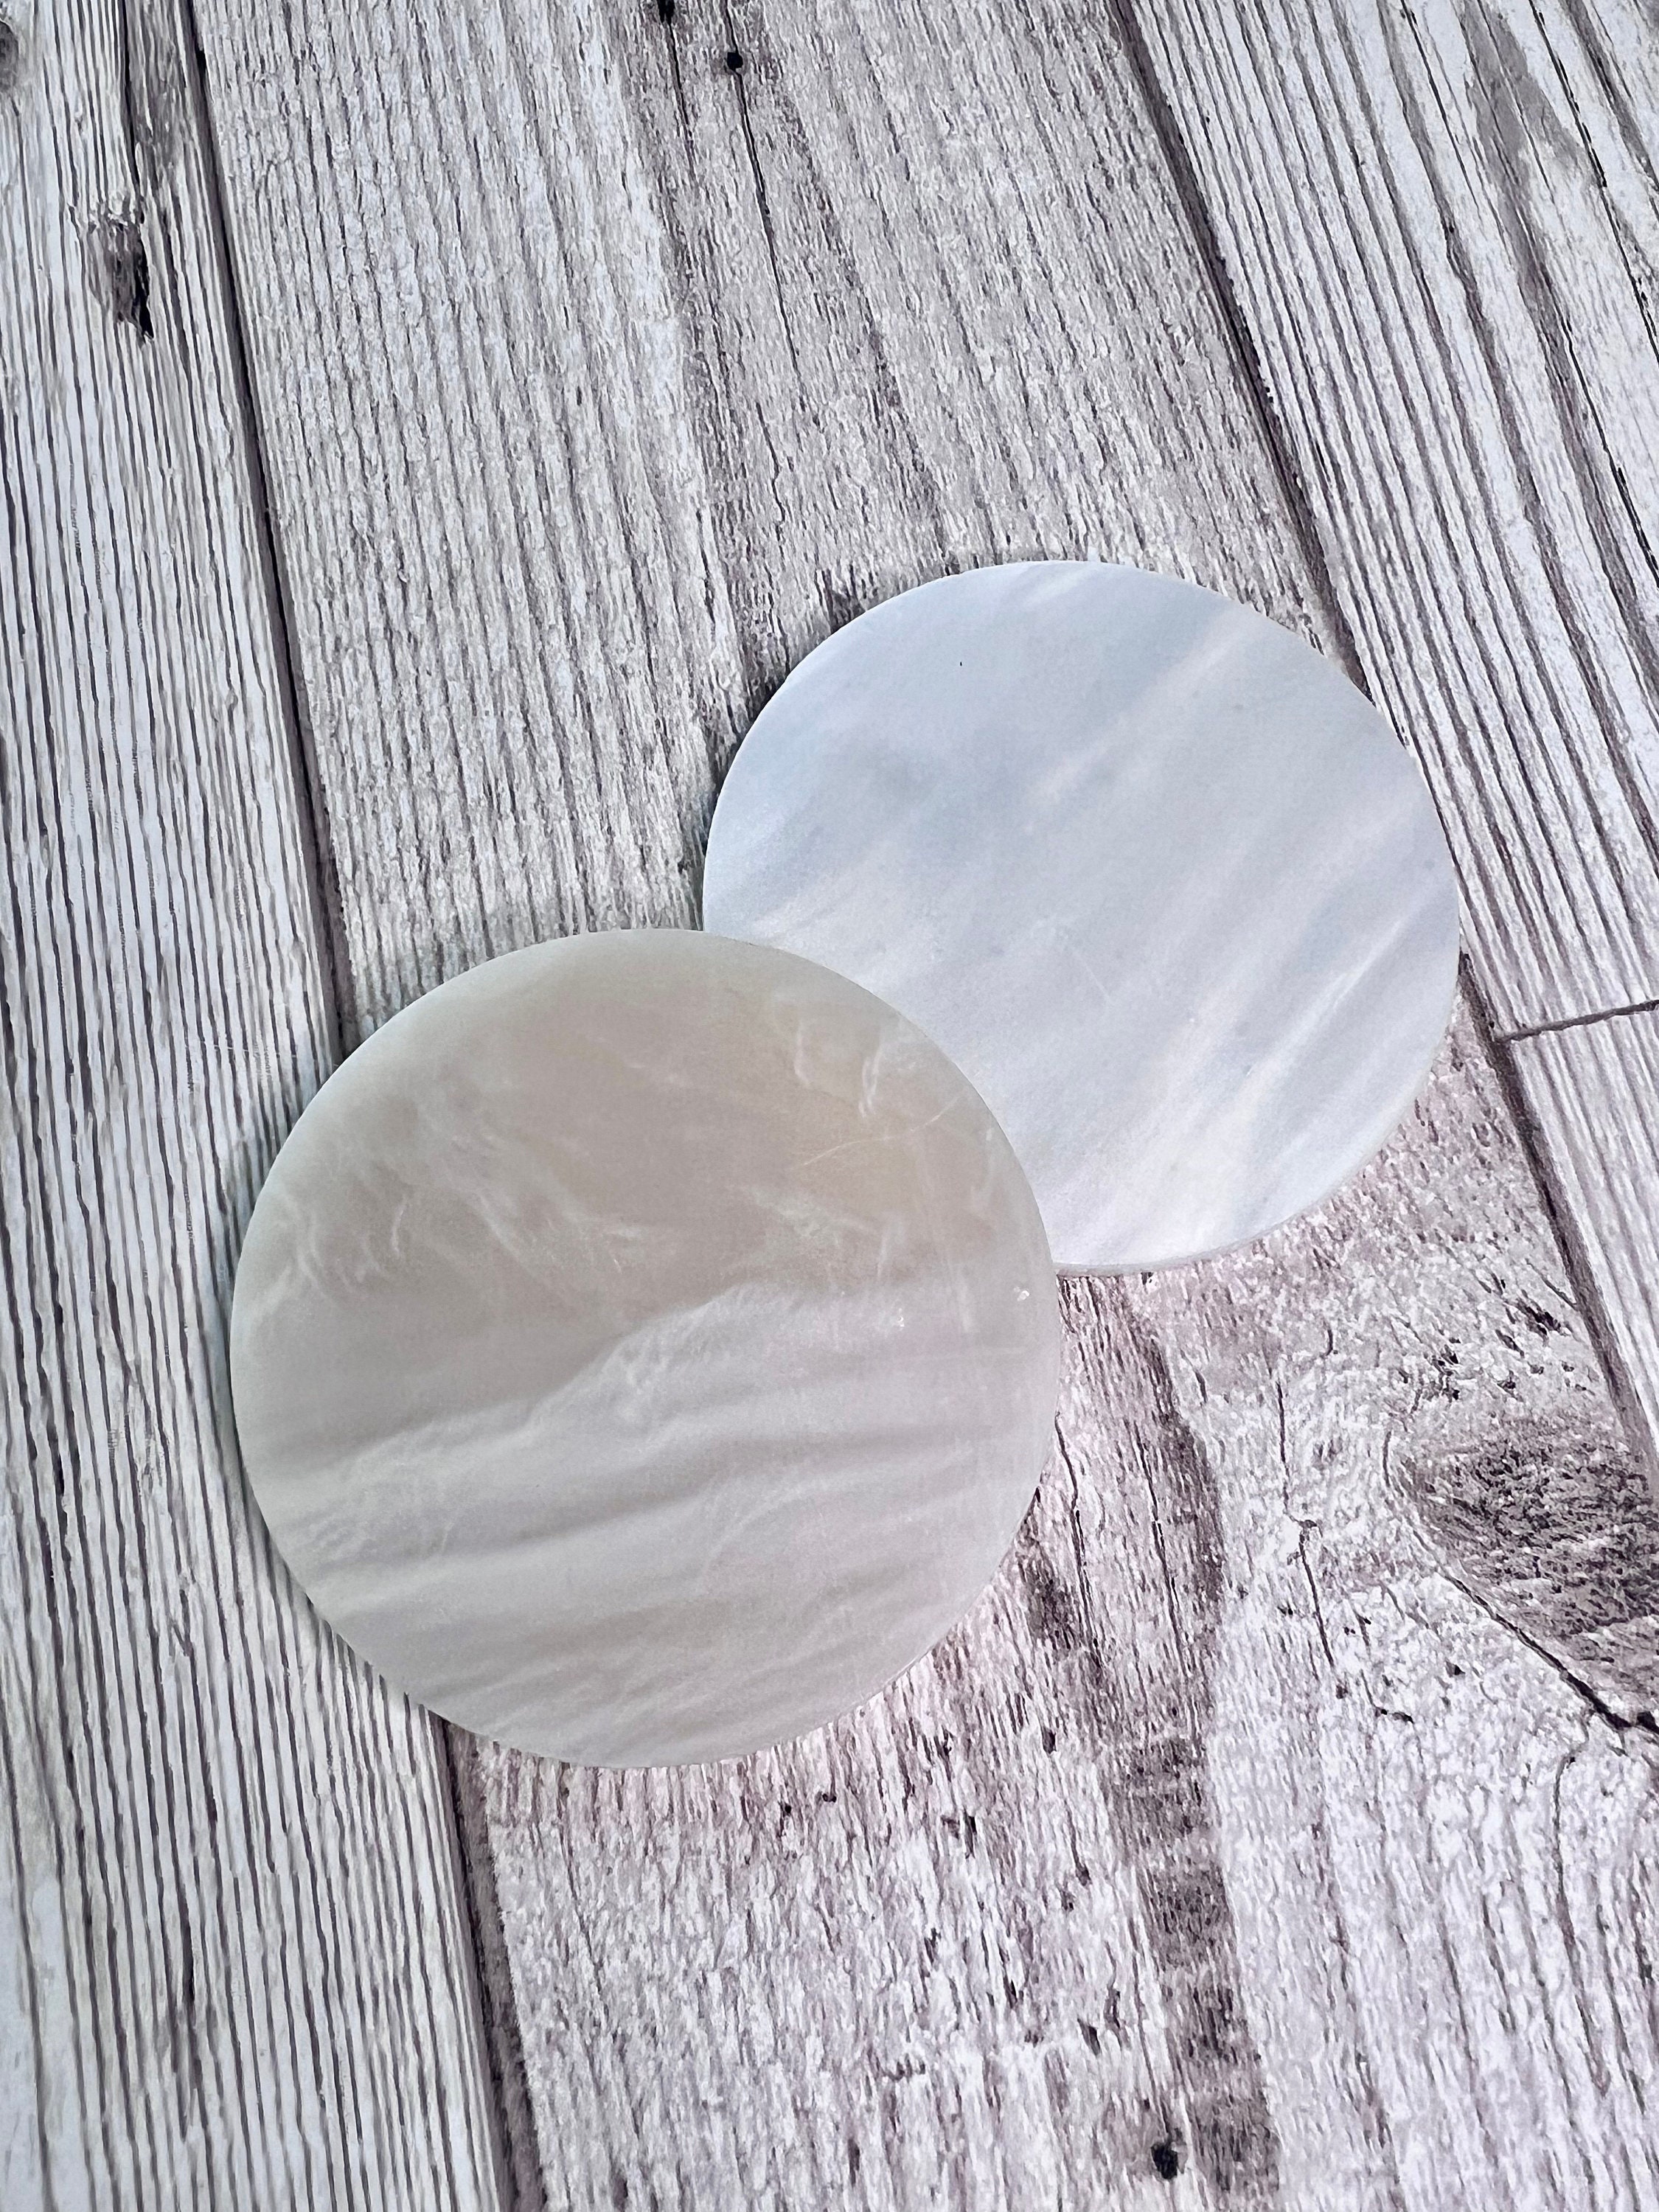 100 Round Clear Acrylic Discs Shapes With Holes, Clear Acrylic Keychain  Blanks, Laser Cut Circle, Jewelry Blanks Acrylic Blanks for Vinyl 